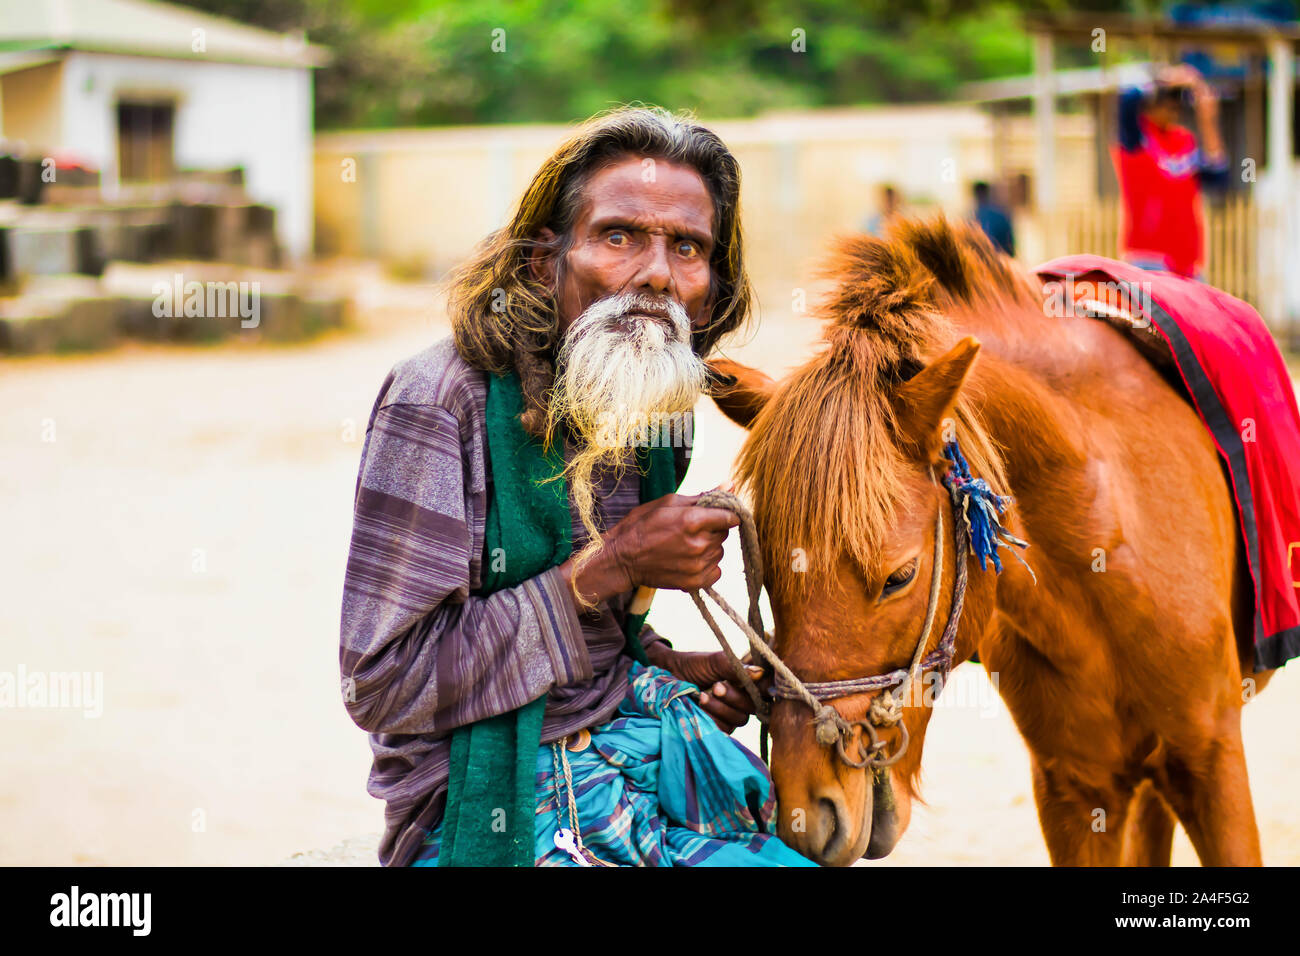 The horse is the last address of this old man. Stock Photo